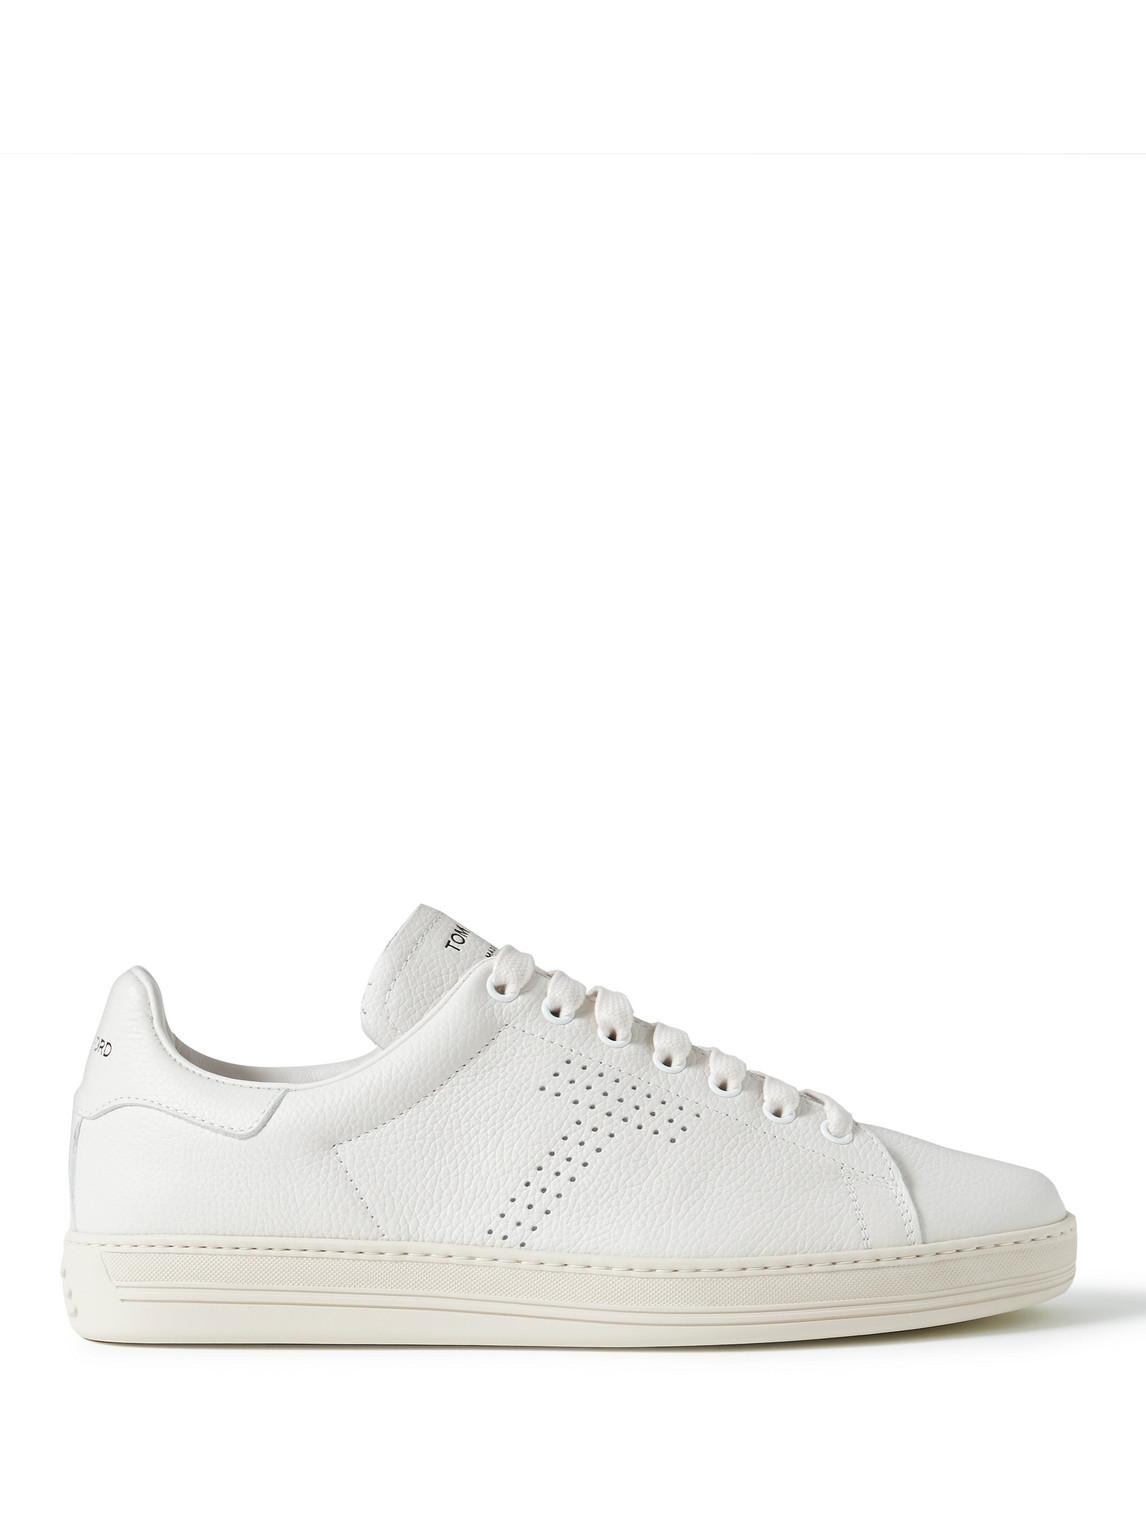 Tom Ford Warwick Perforated Full-grain Leather Sneakers in White for ...